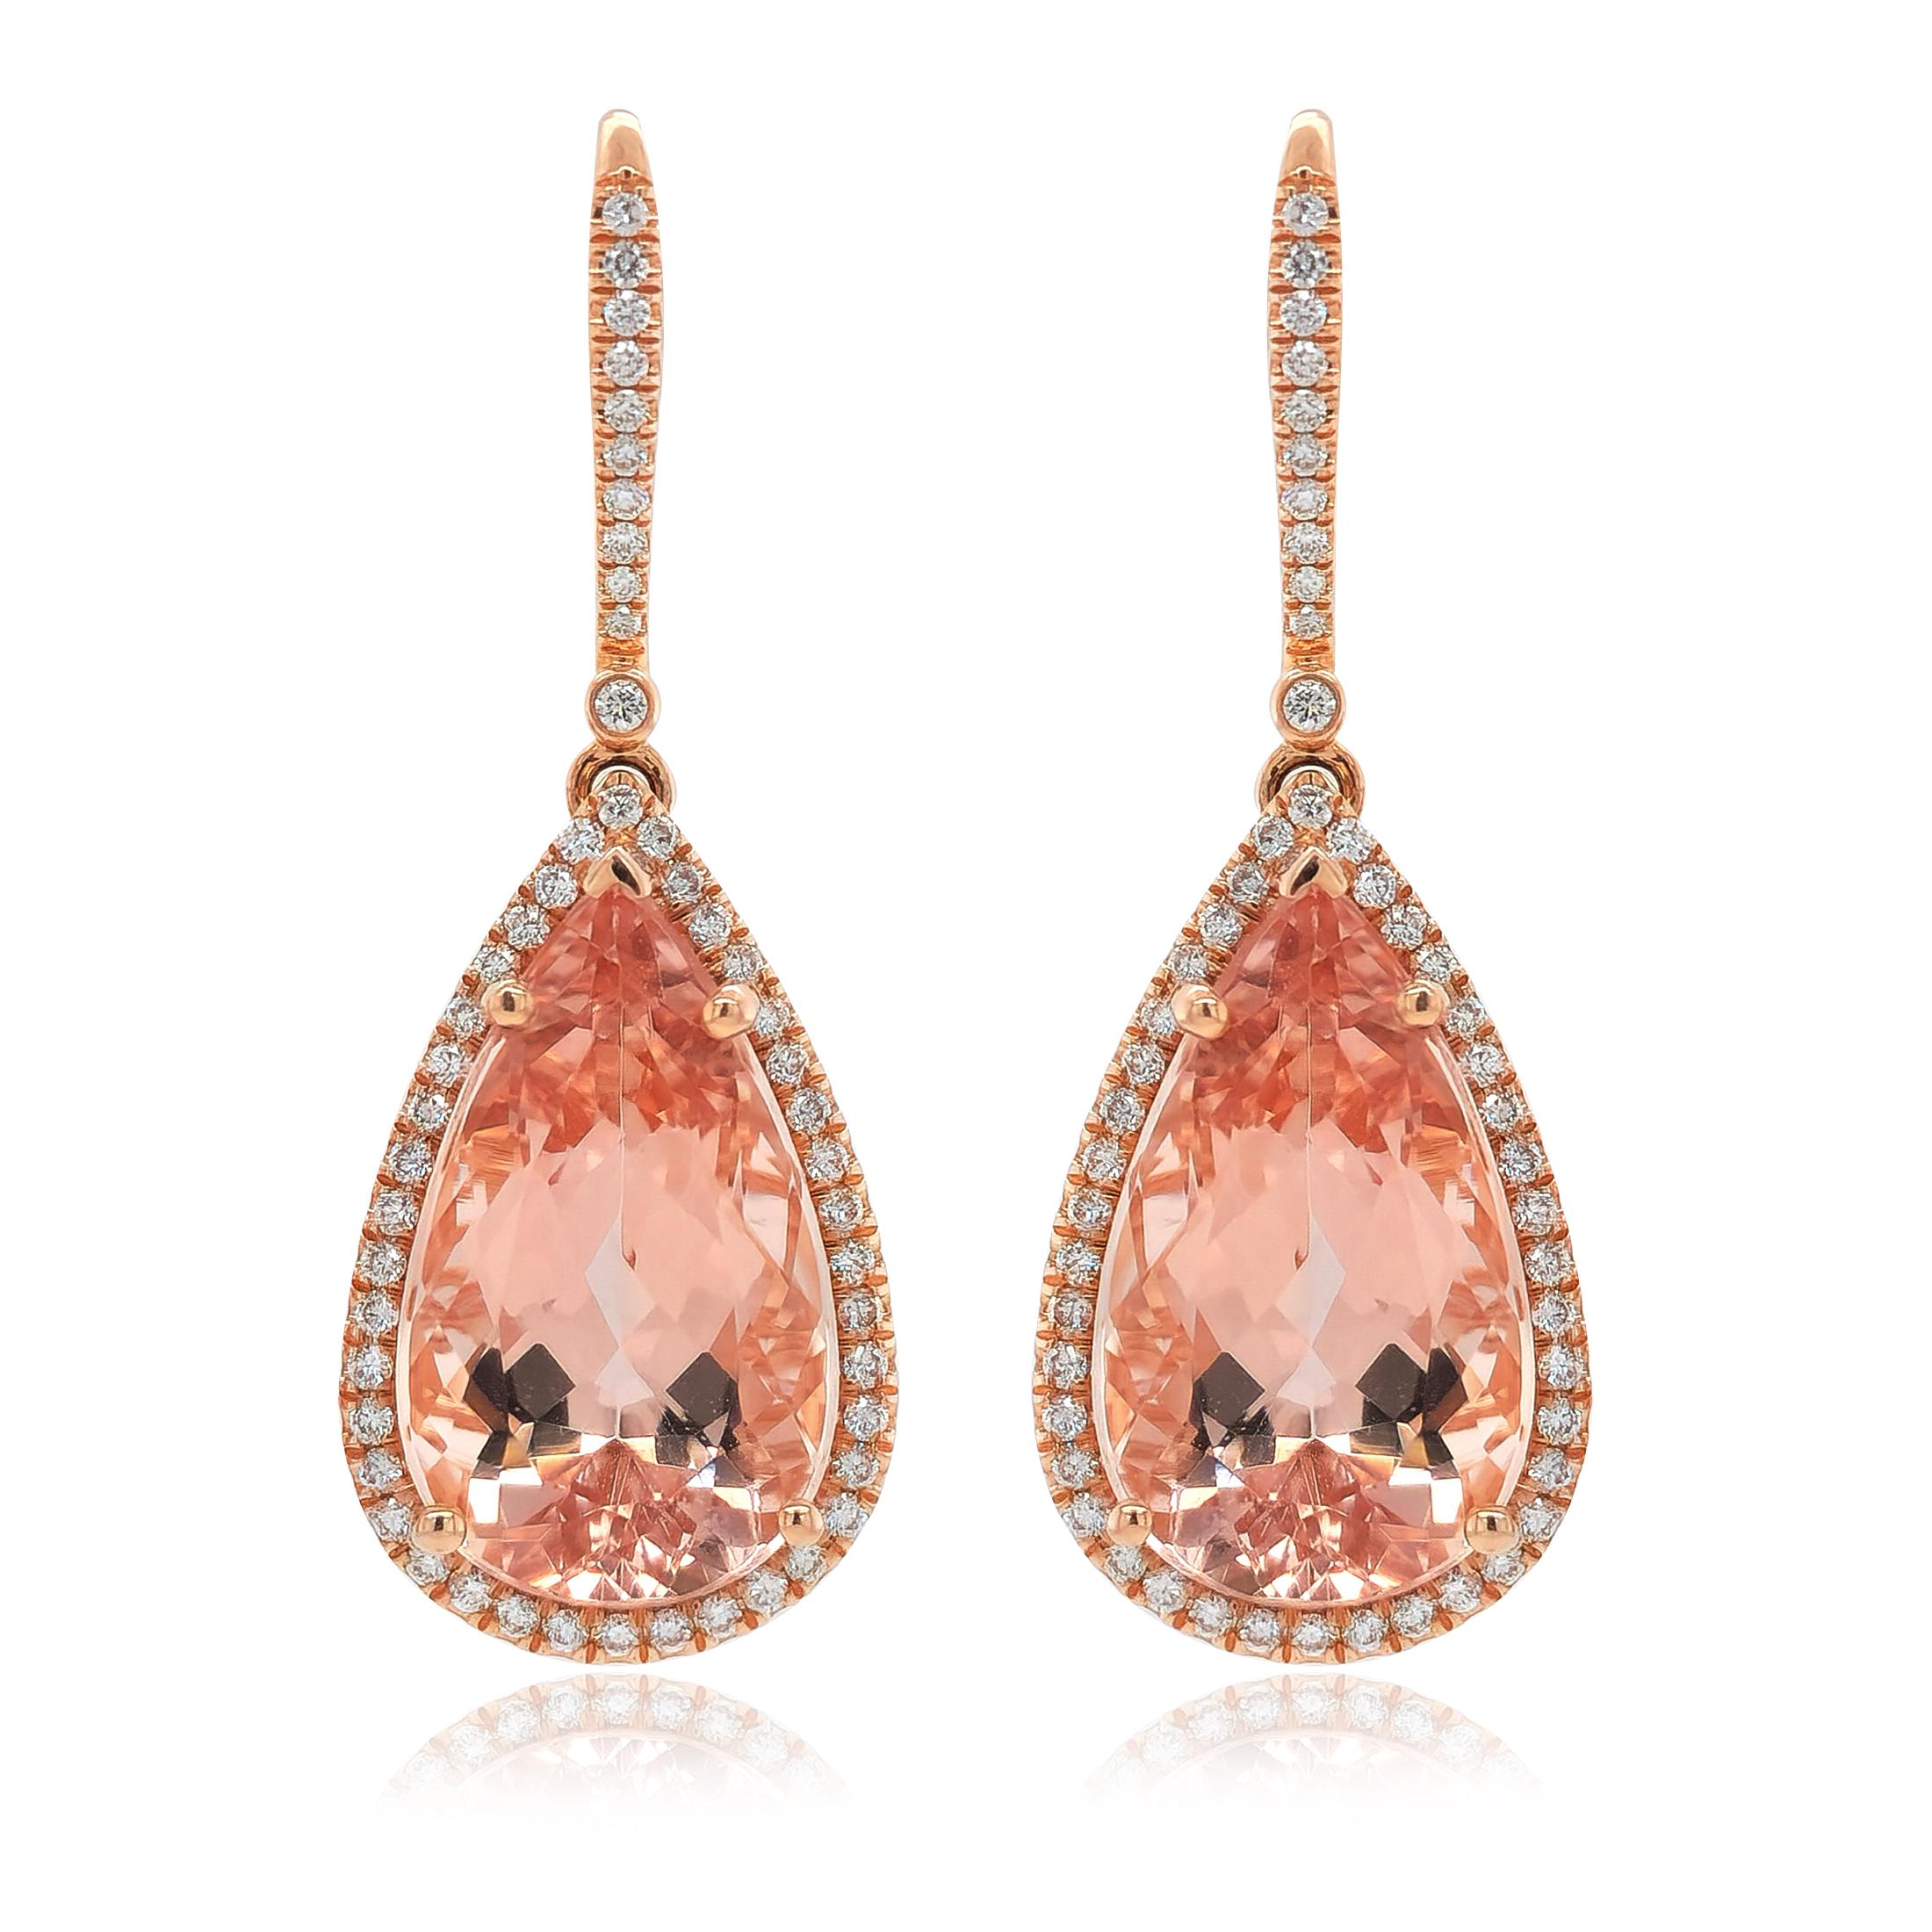 Adorned with lovely gemstones in rose gold, these earrings feature 15.54 carats of mystical Morganites that infuse a touch of fresh elegance. Set in durable 14K gold, the everlasting salmon-colored beryl exudes a unique allure. Despite being a